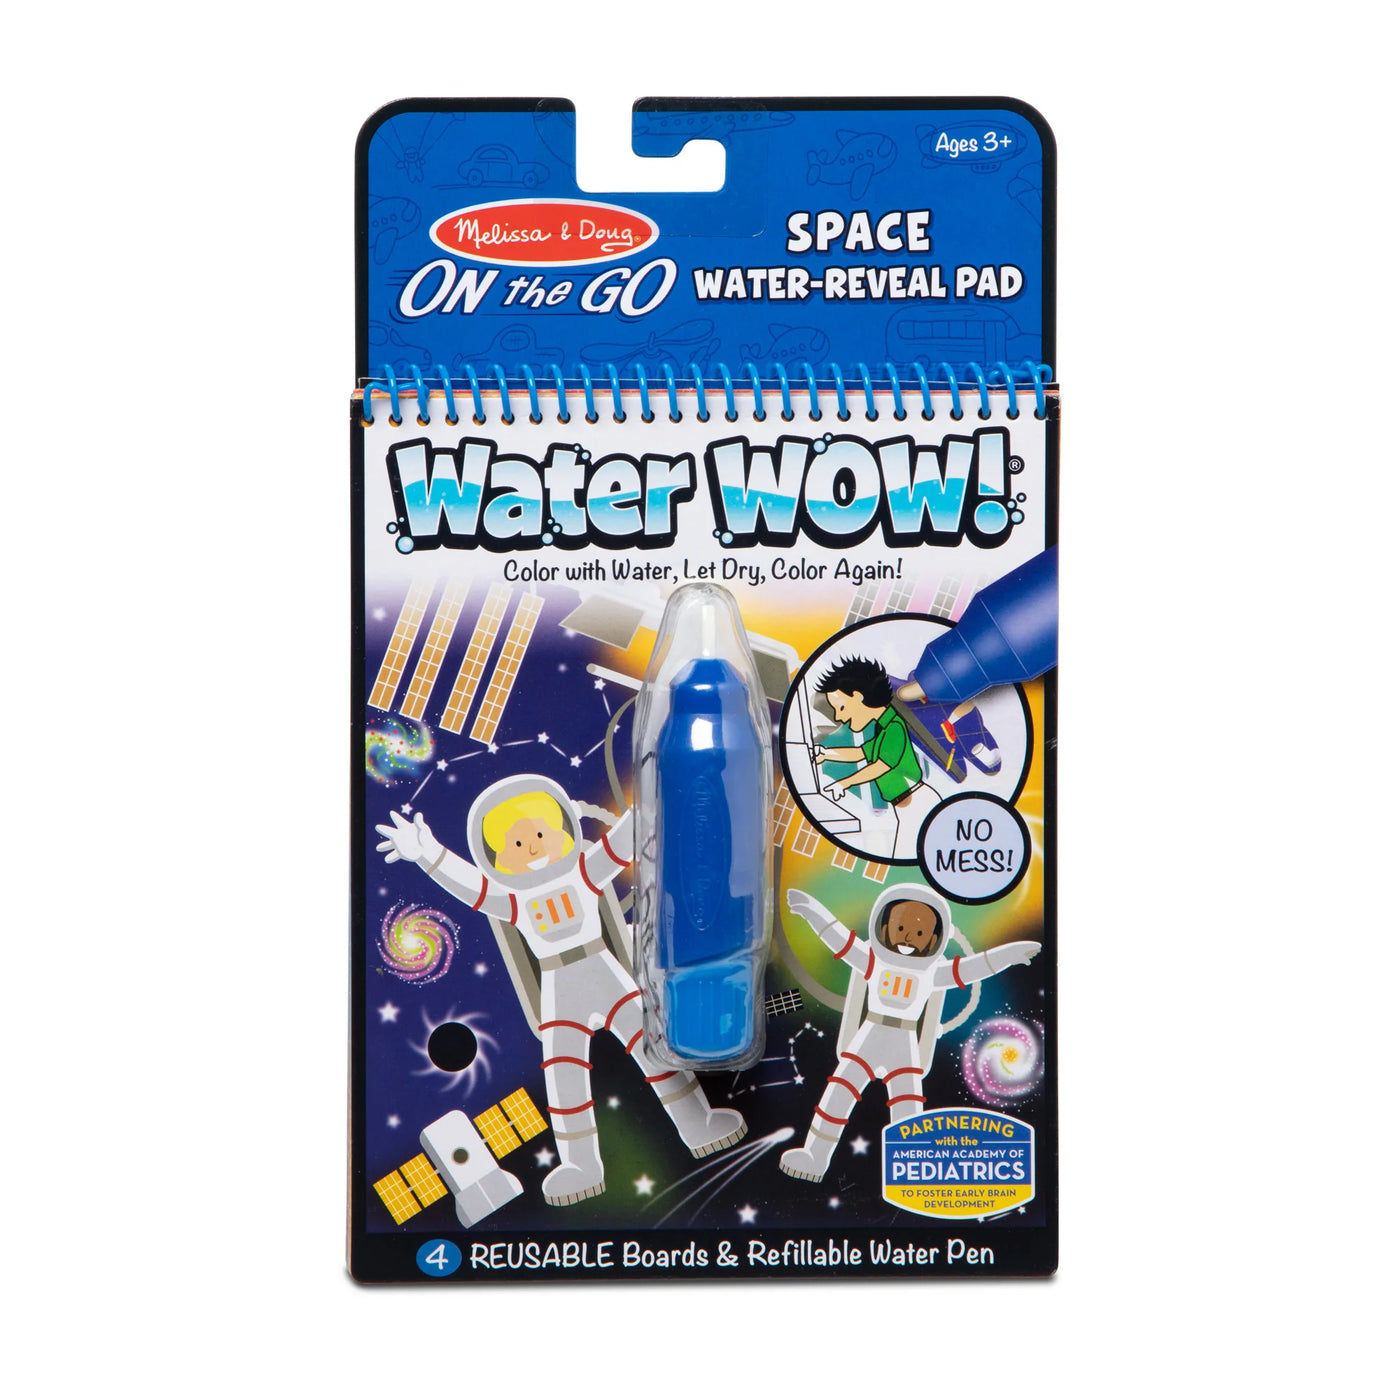 Water Wow! Space Water-Reveal Pad